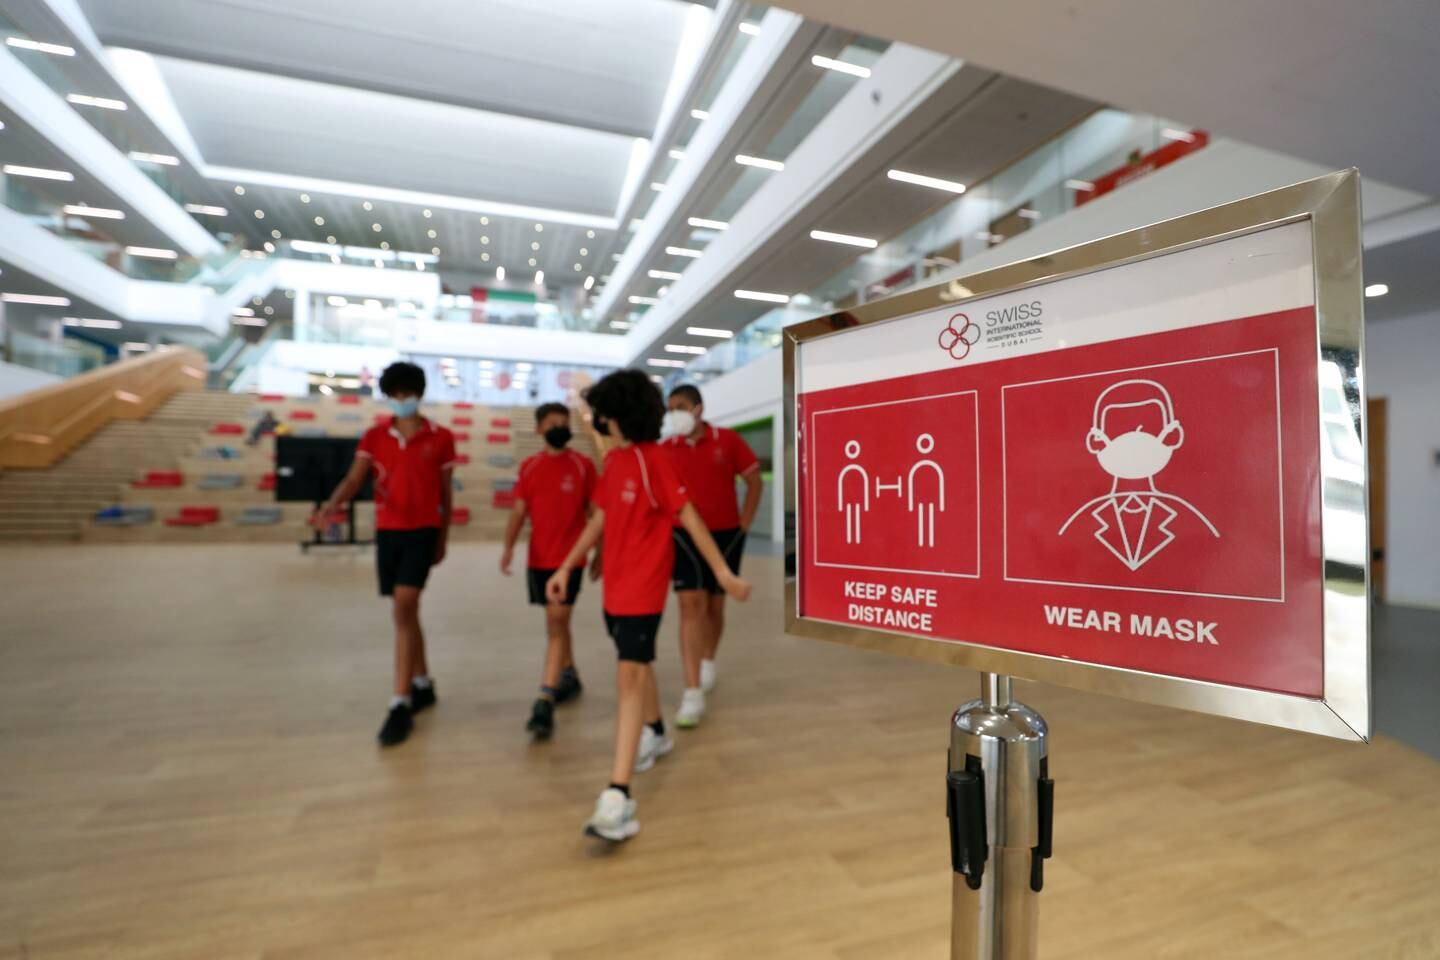 Signs remind pupils to follow Covid-19 precautions at the Swiss International Scientific School in Dubai. Chris Whiteoak / The National